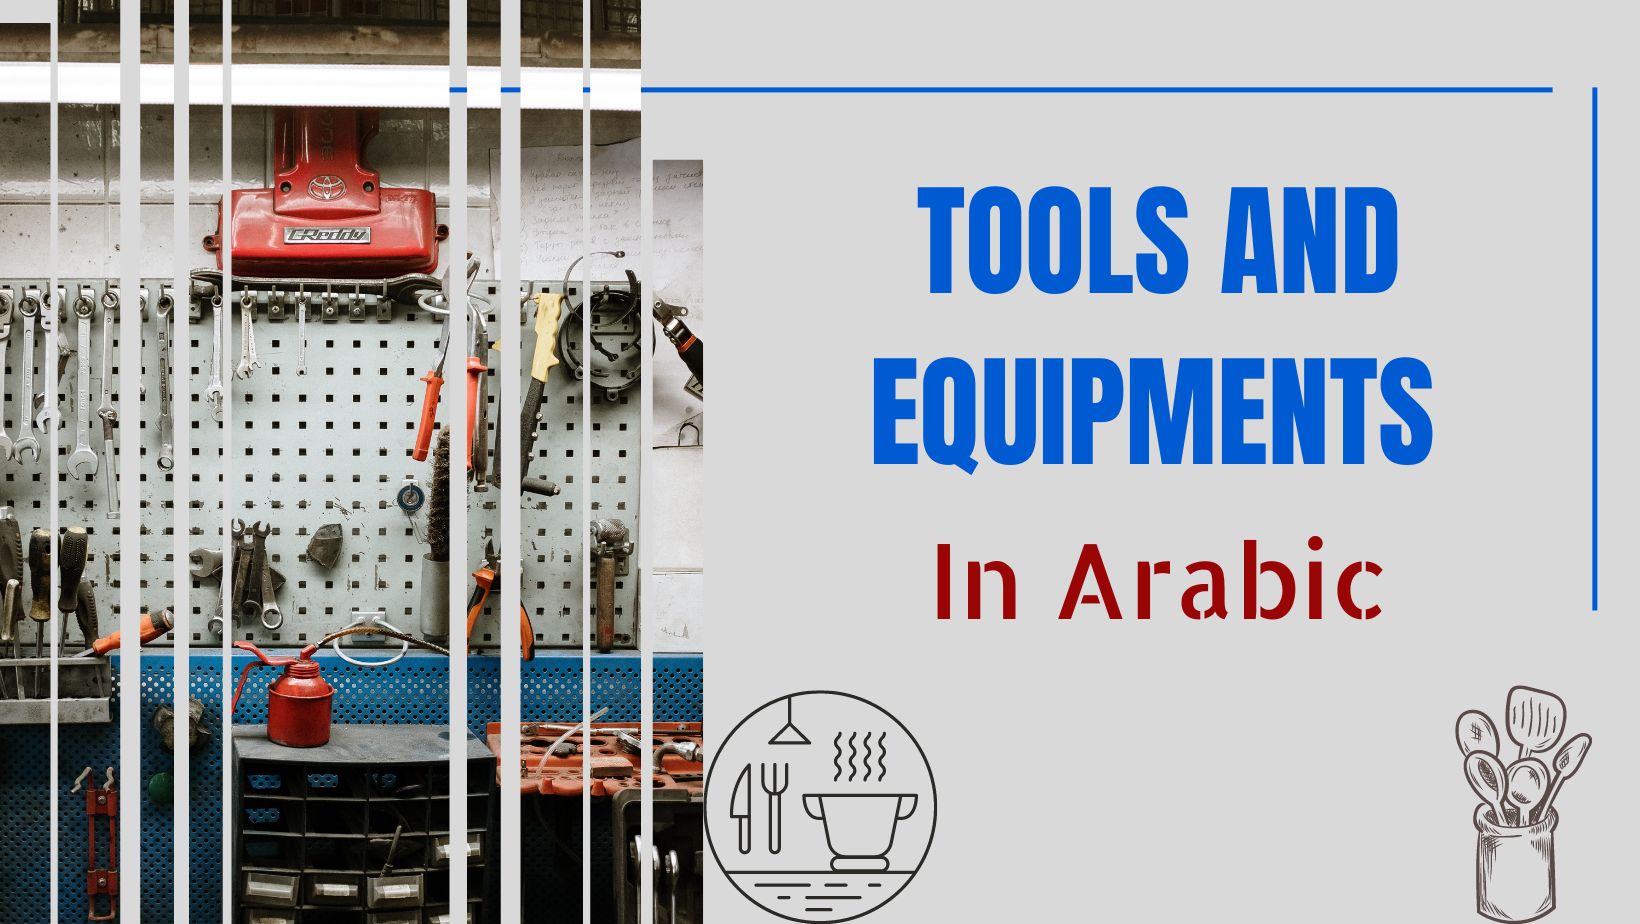 Tools and equipment names in Arabic